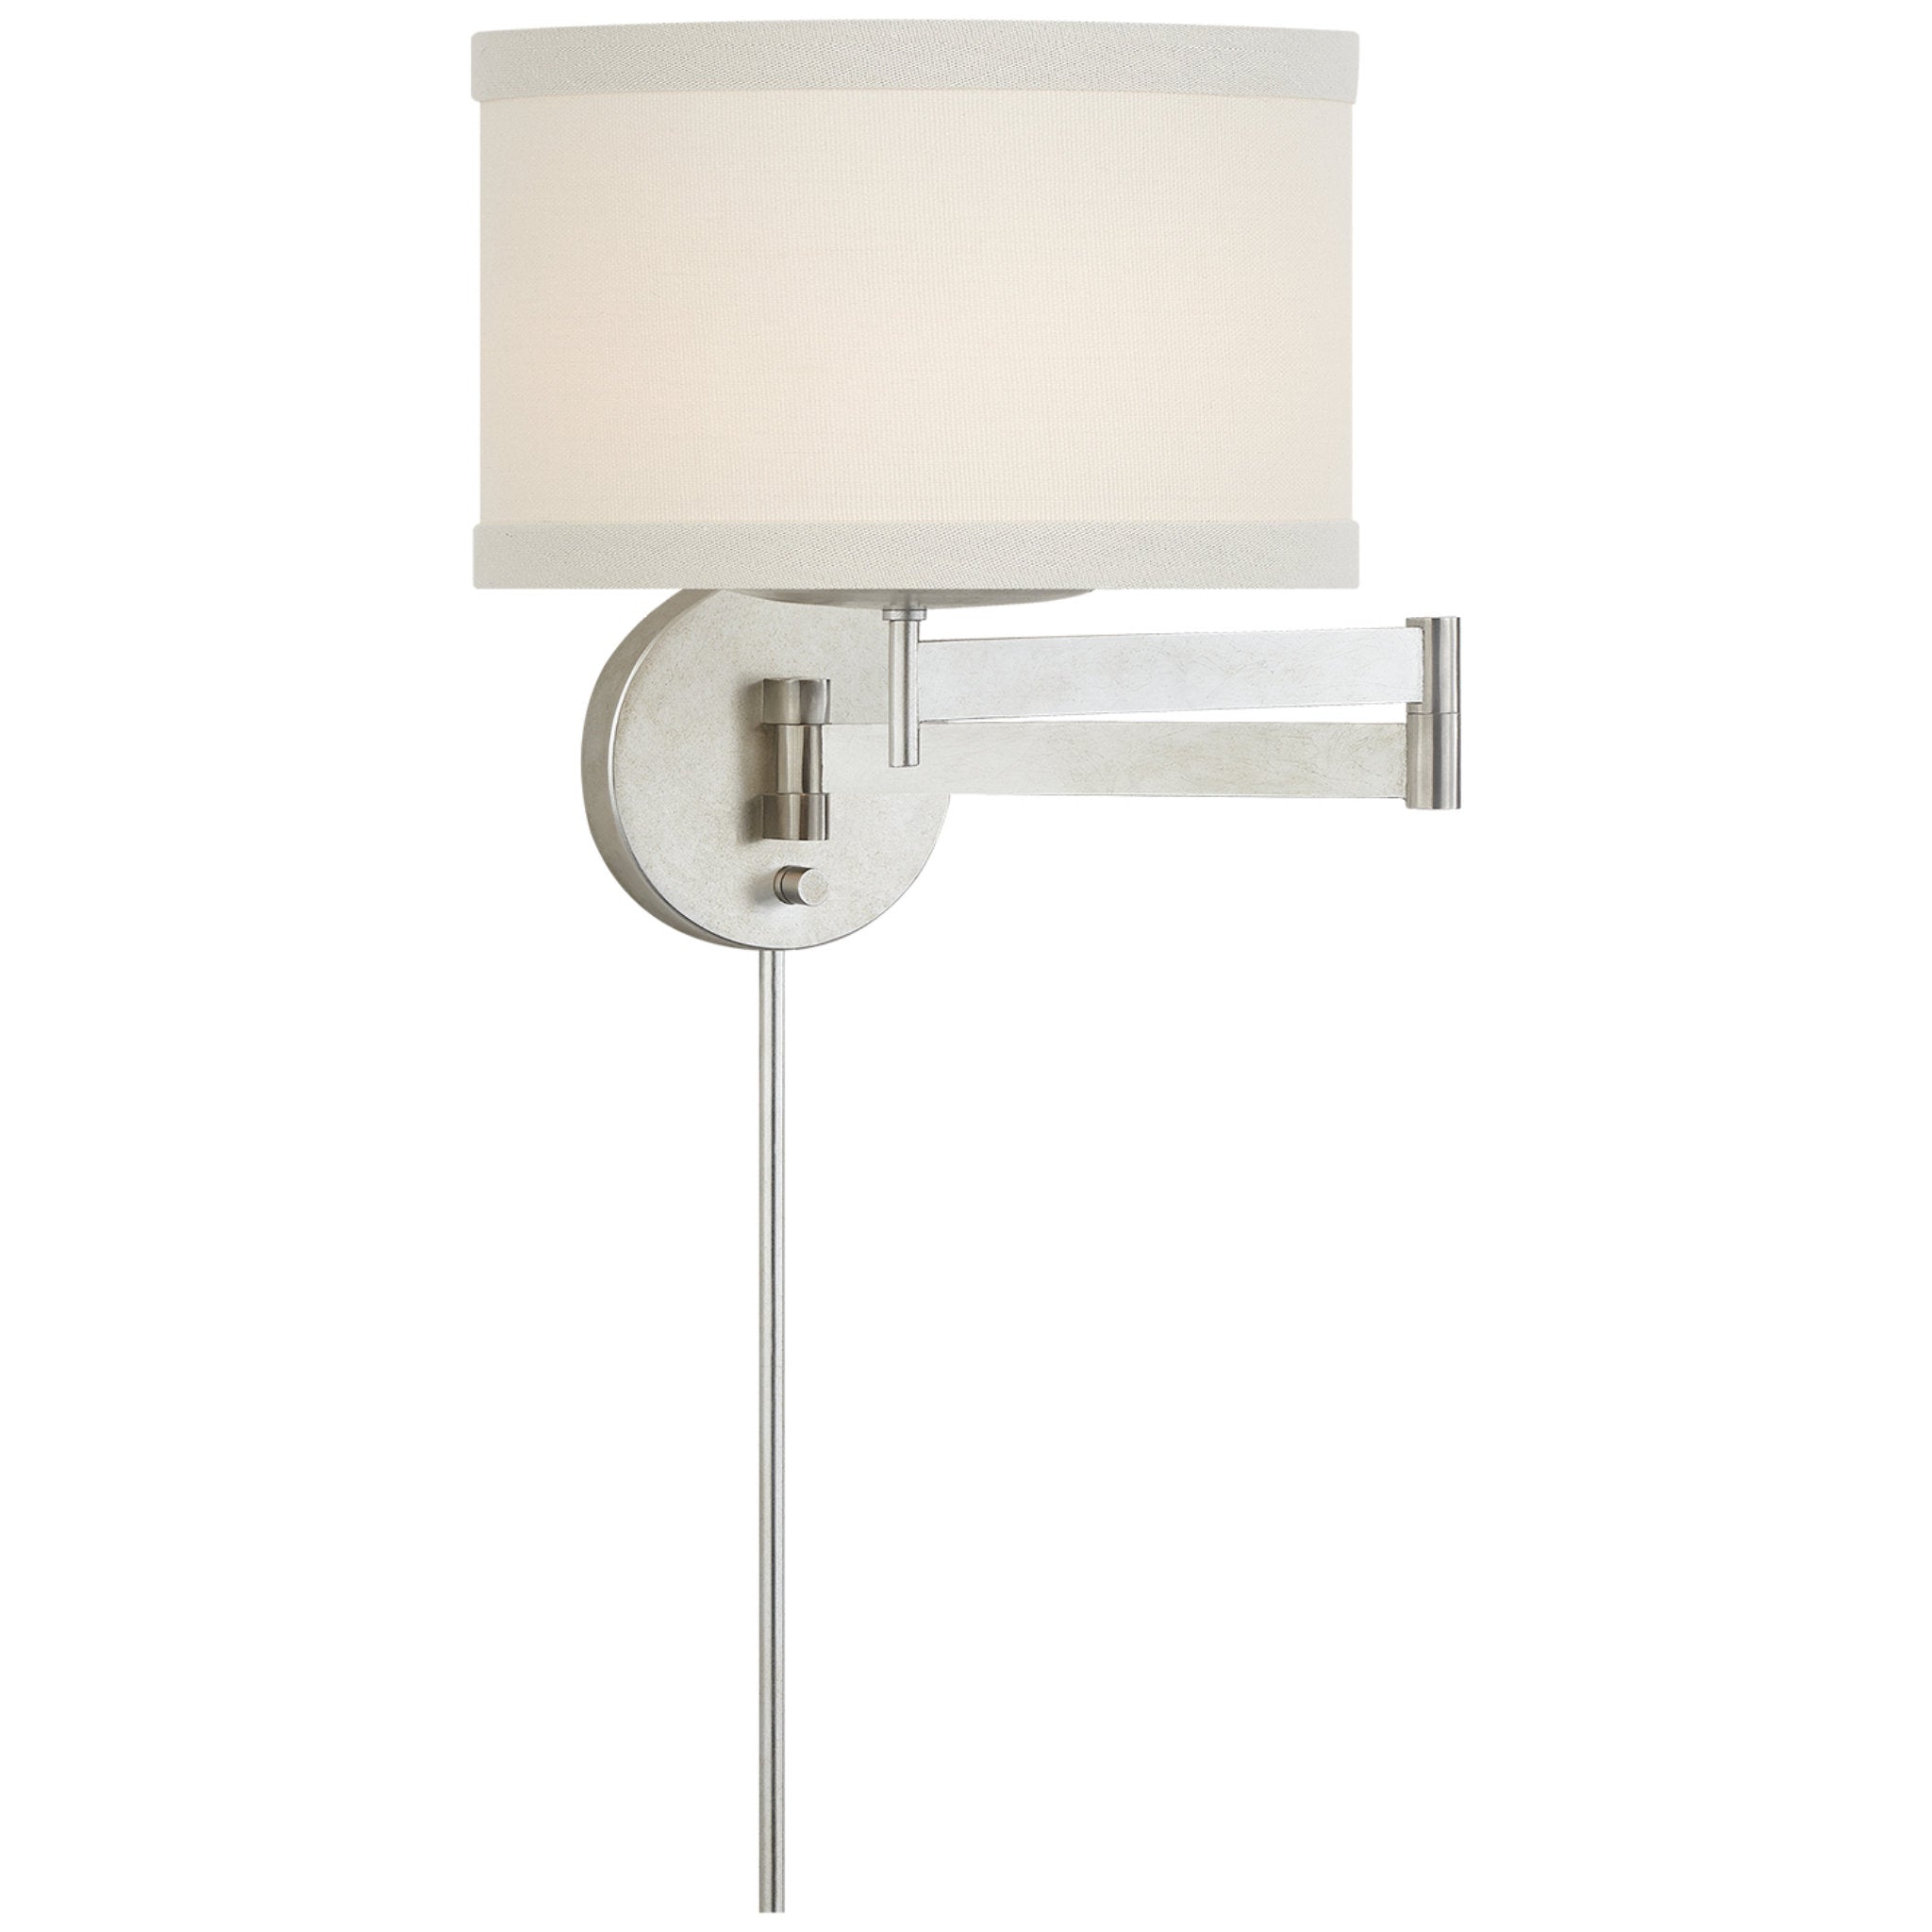 kate spade new york Walker Swing Arm Sconce in Burnished Silver Leaf with Cream Linen Shade